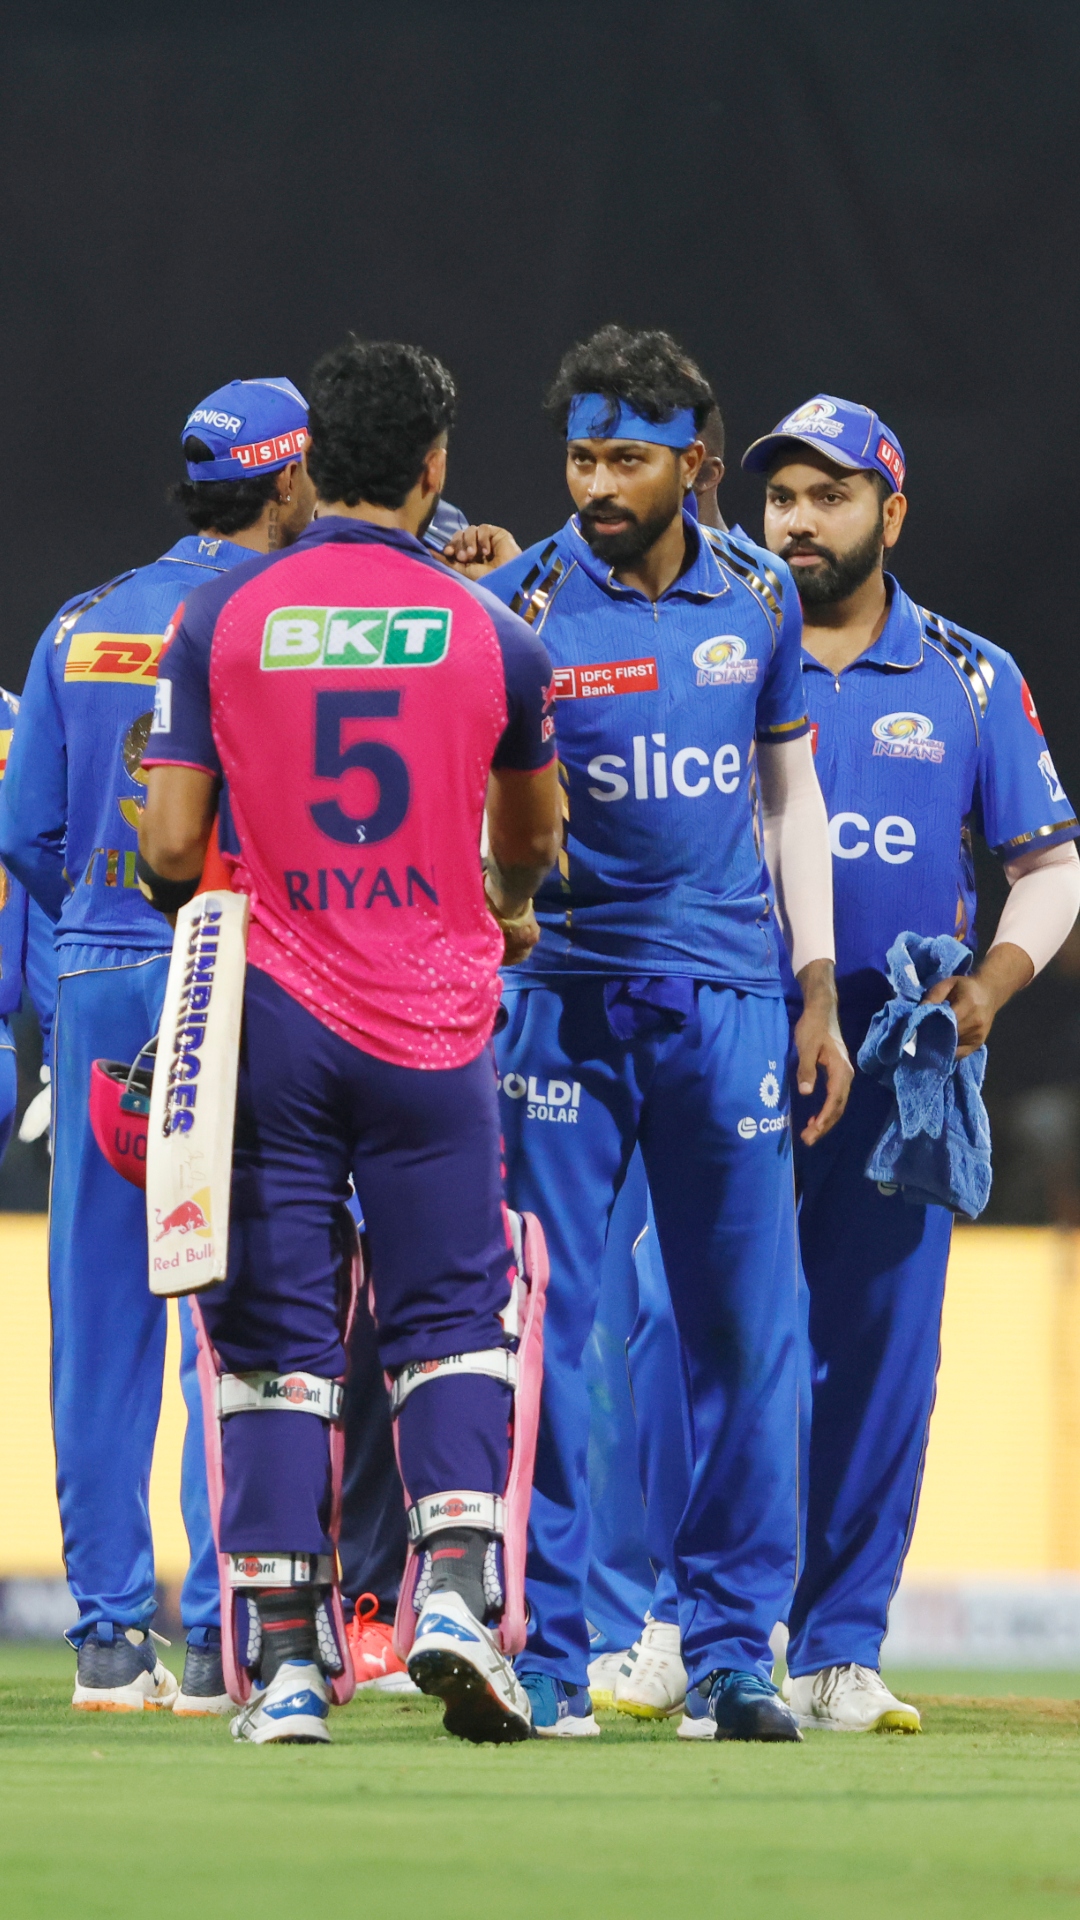 Mumbai Indians create all-time record despite suffering crushing defeat to Rajasthan Royals